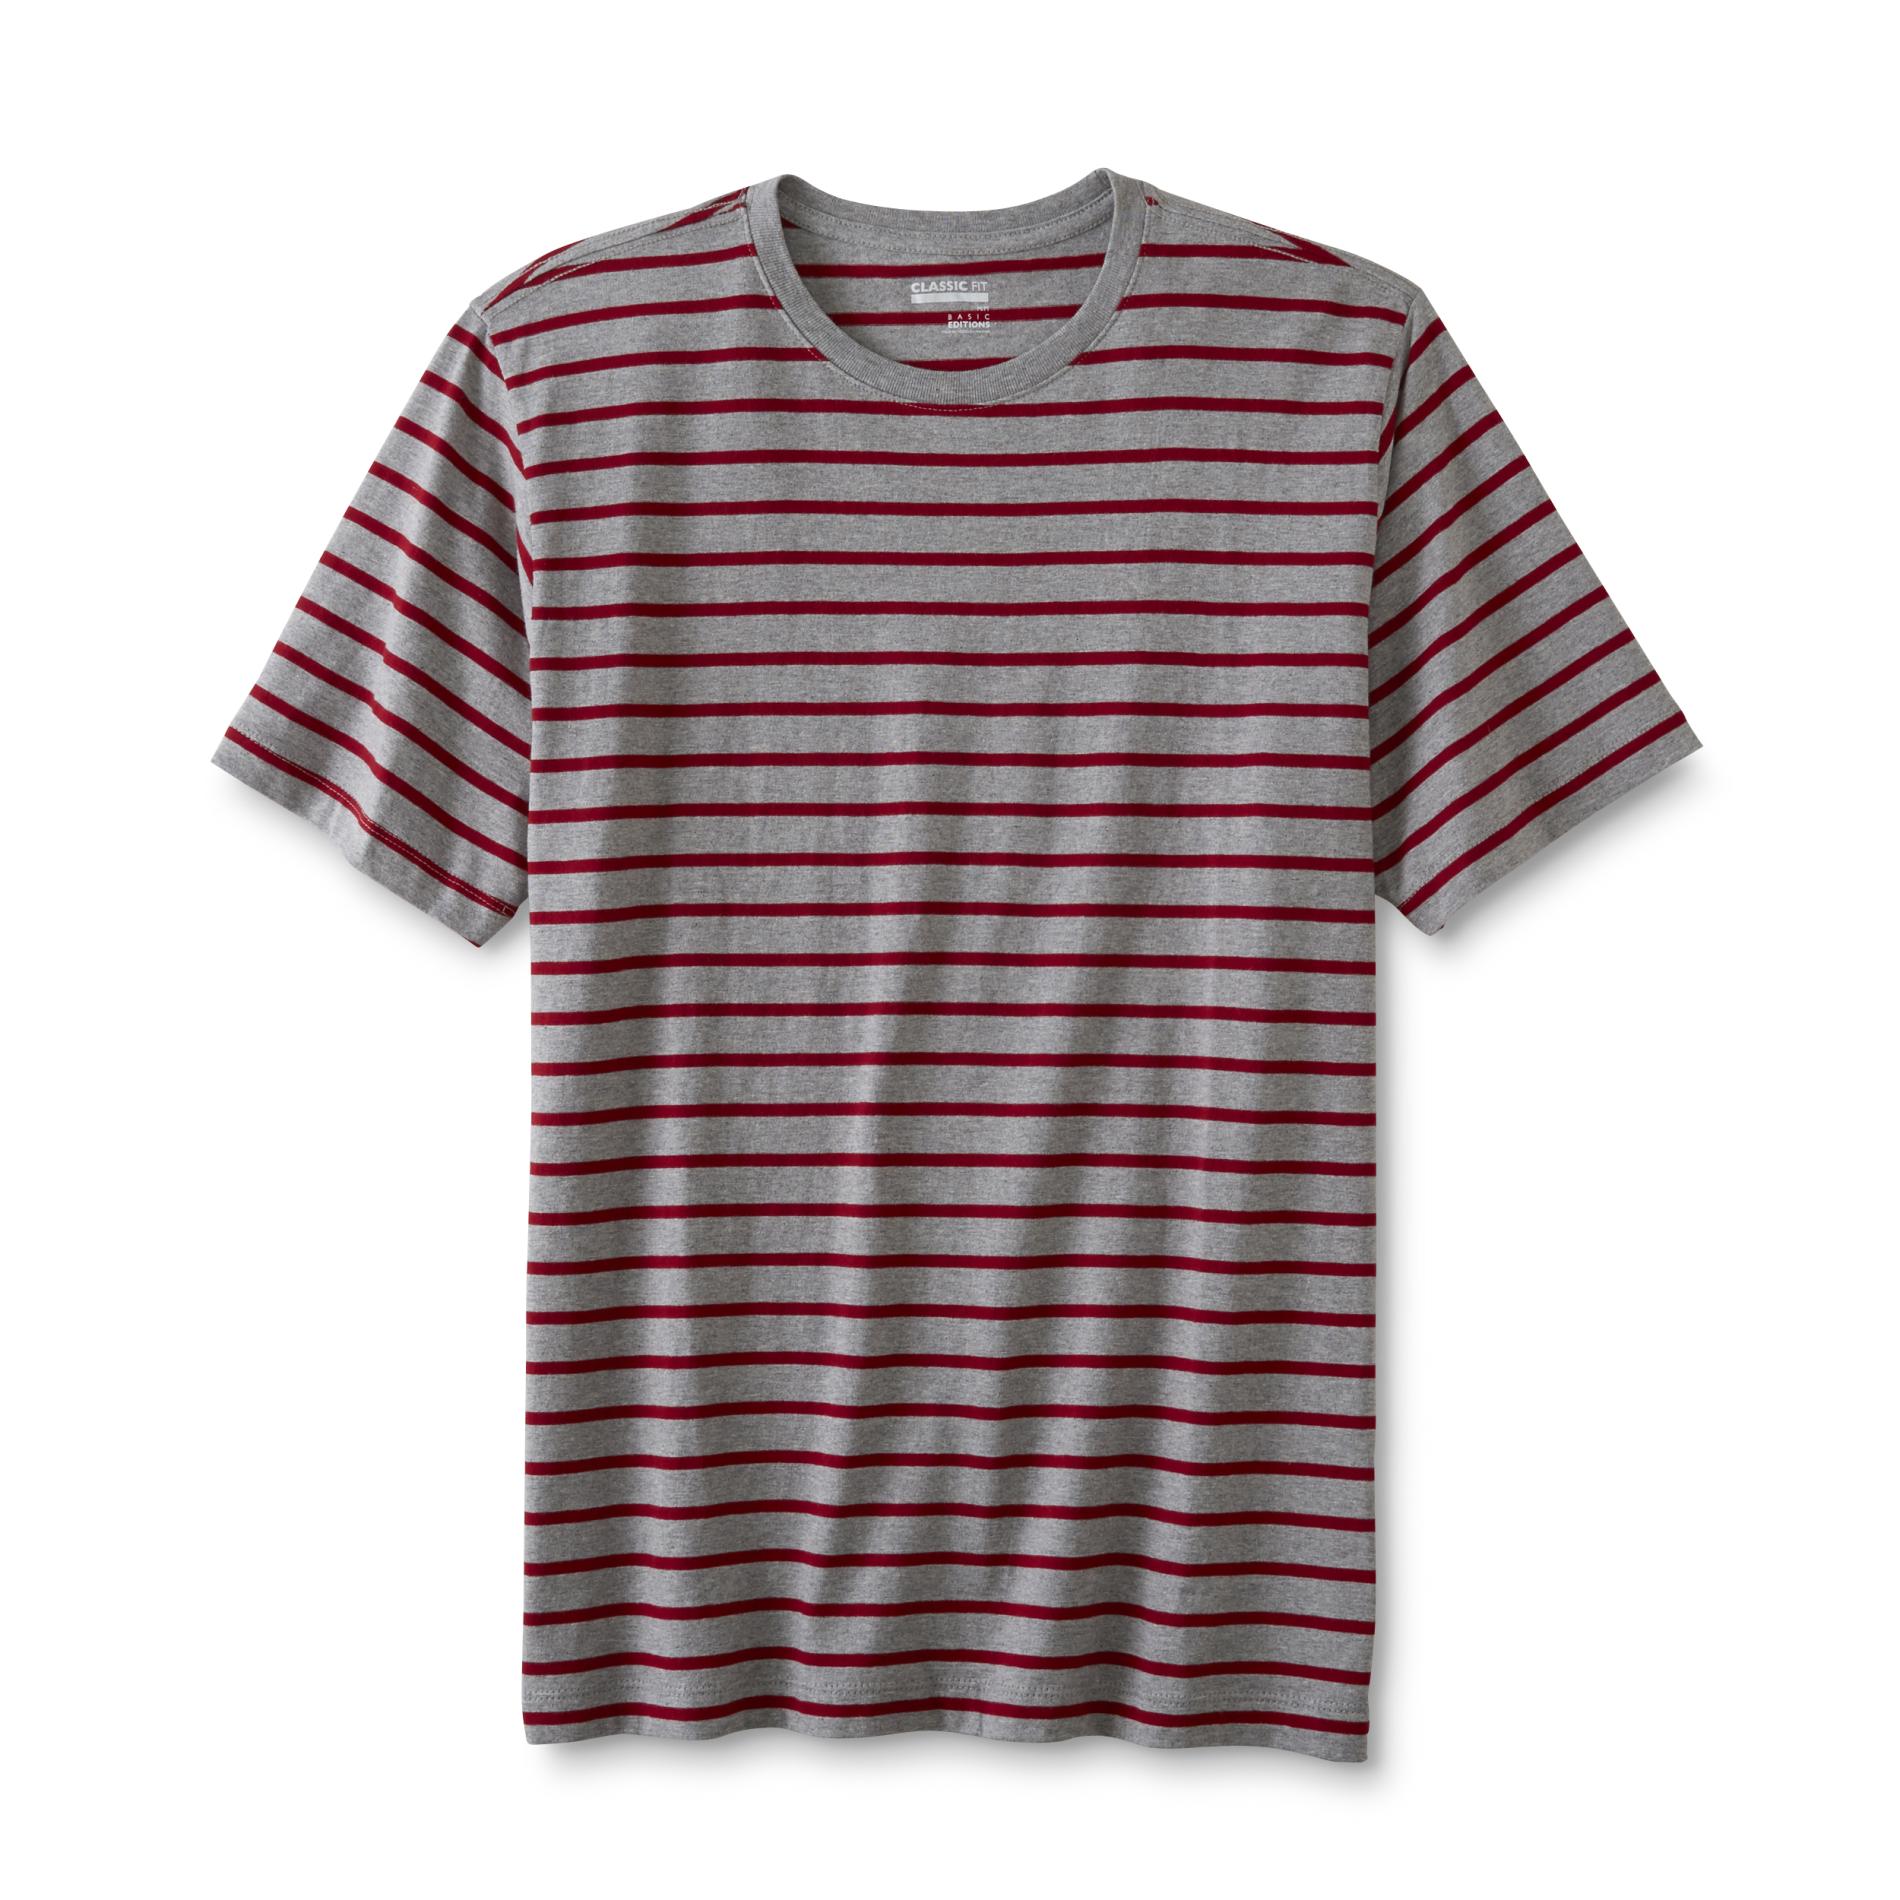 Basic Editions Men's Classic Fit T-Shirt - Striped